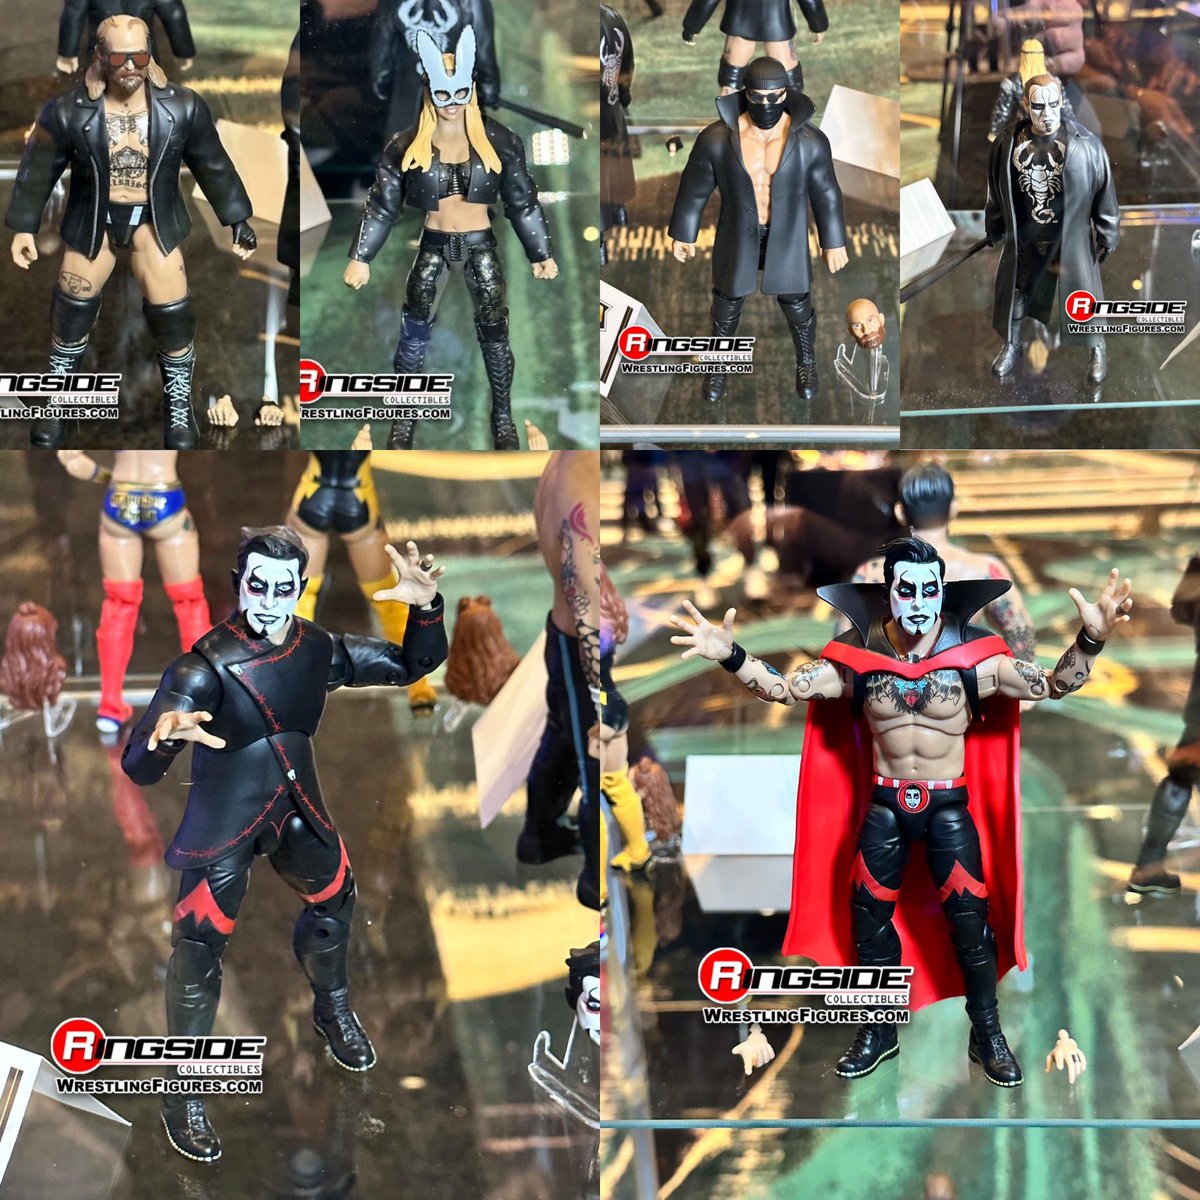 AEW Unrivaled series 13 on display featuring the Rare caped Danhausen!

Join WhatNot @ WHATHEEL.com & get a $15 credit to use!

#figheel #wwe #wwemattel #wweelite #wweraw #aew #aewdynamite 
#actionfigures #toycollector